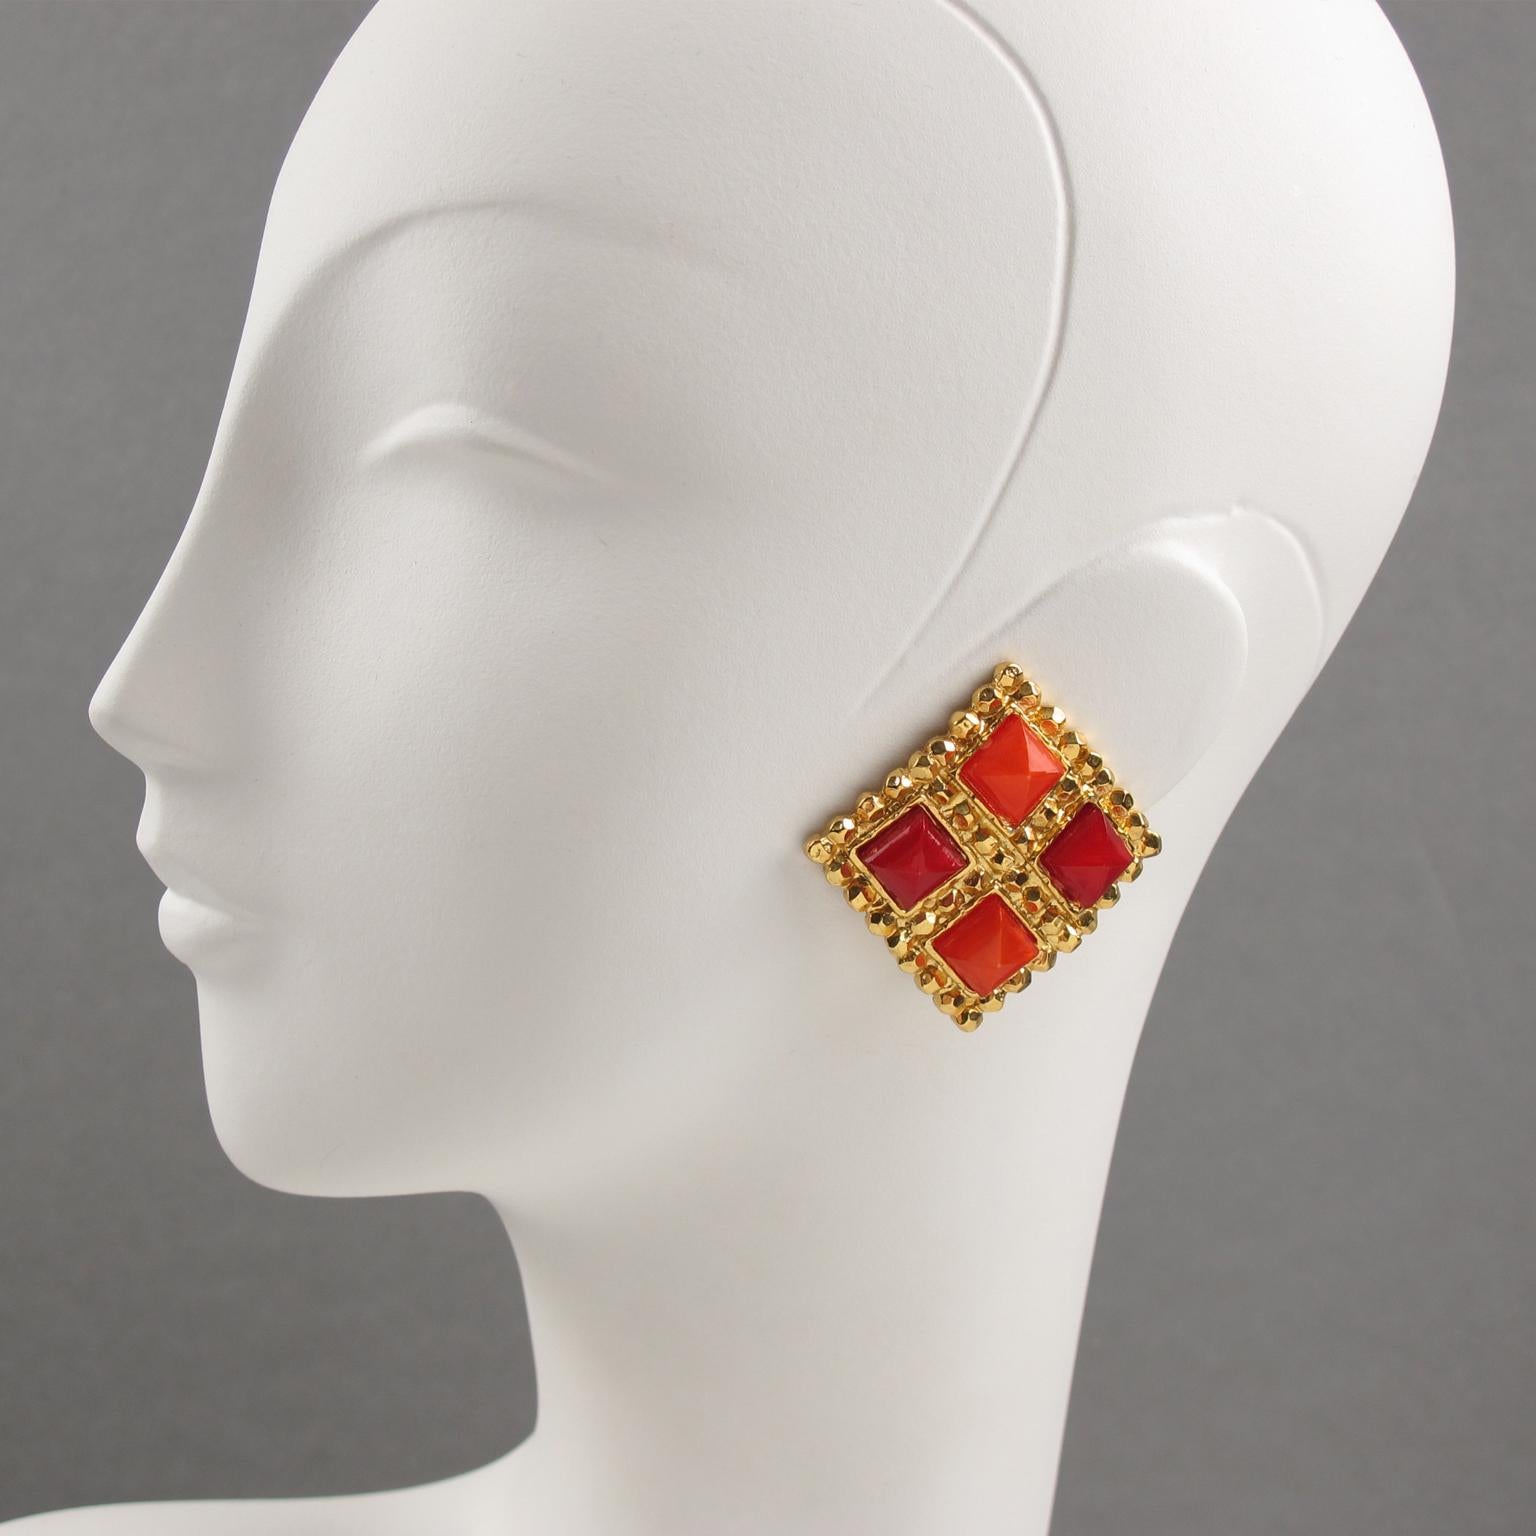 Lovely French designer Edouard Rambaud Paris signed clip-on earrings. Byzantine-inspired design with shiny gilt metal large square frame topped with geometric resin cabochons. Assorted colors of neon orange and scarlet red with a light moon-glow